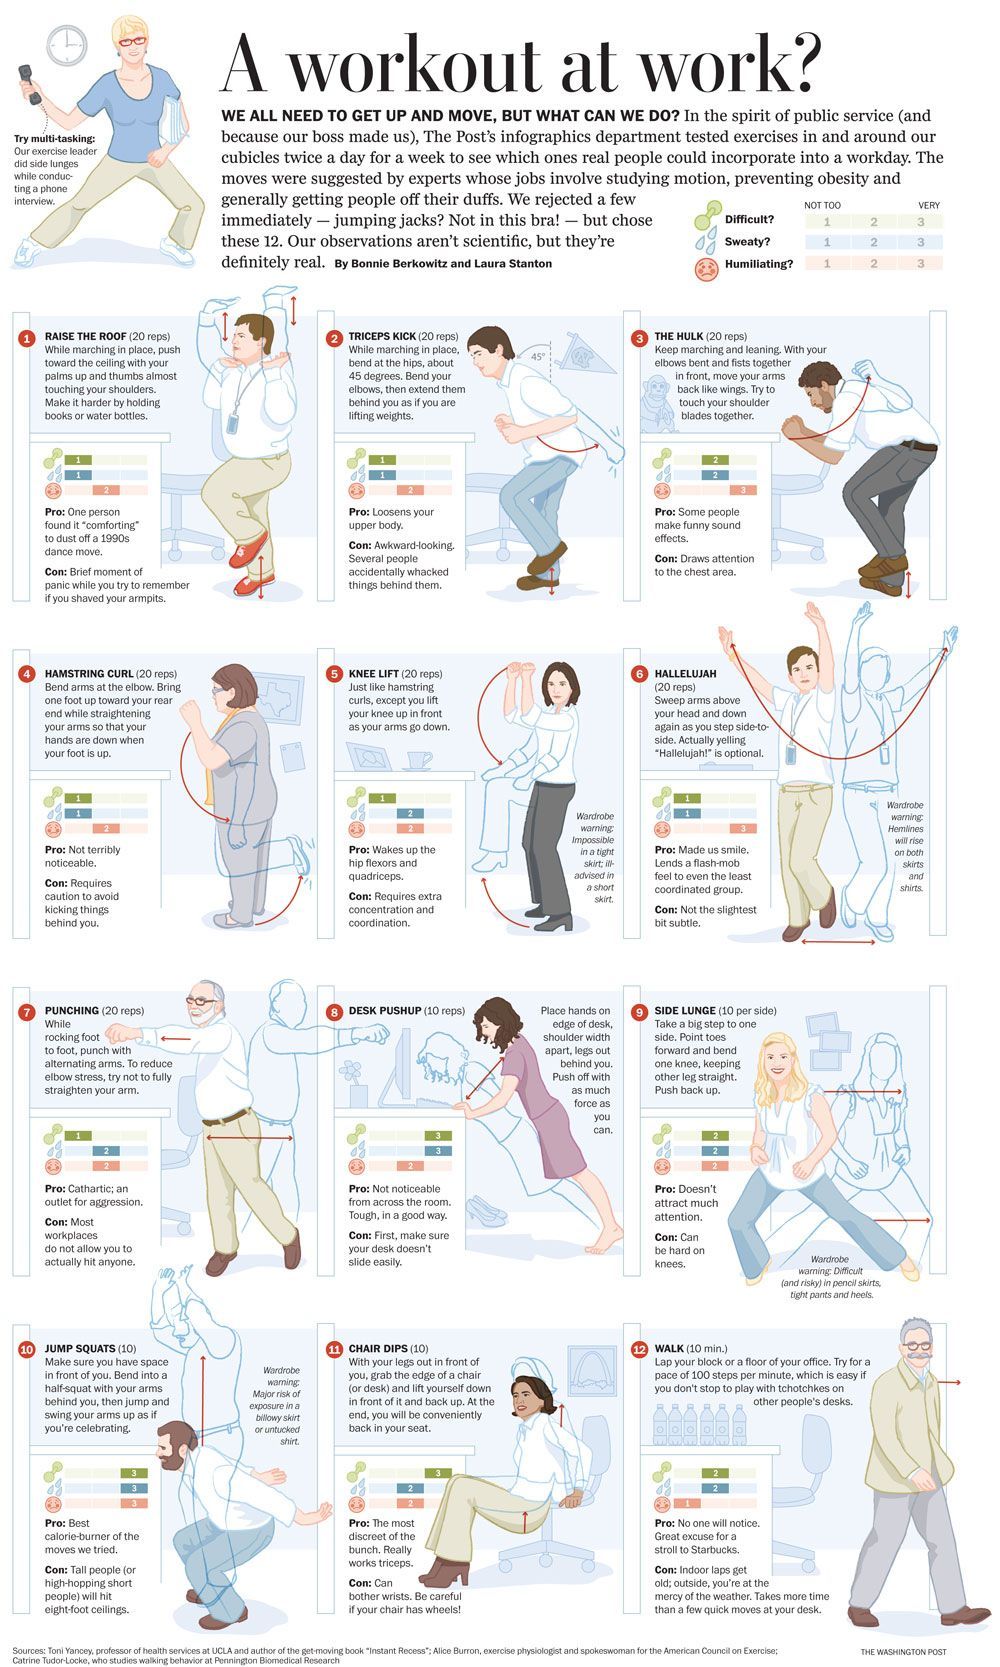 Some REAL exercises you can do at the office!  I saw this one when I googled 